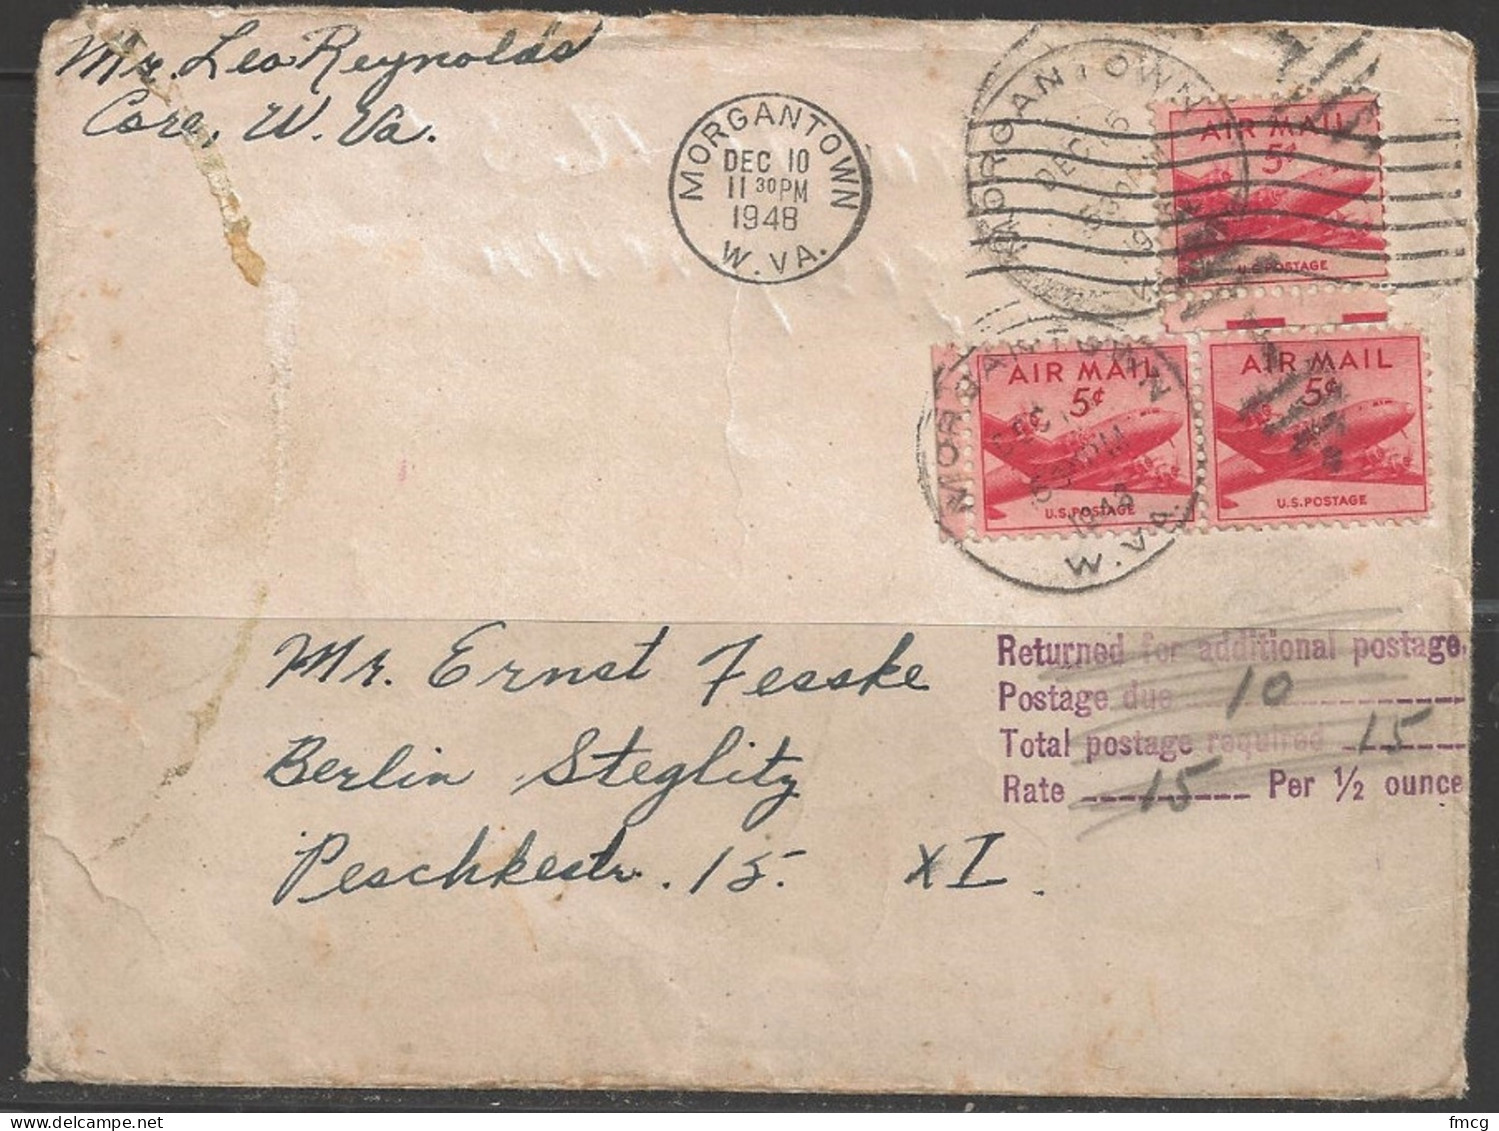 1949 5 Cents Airmail, Additional Postage, Morgantown WVA To Berlin Germany - Lettres & Documents